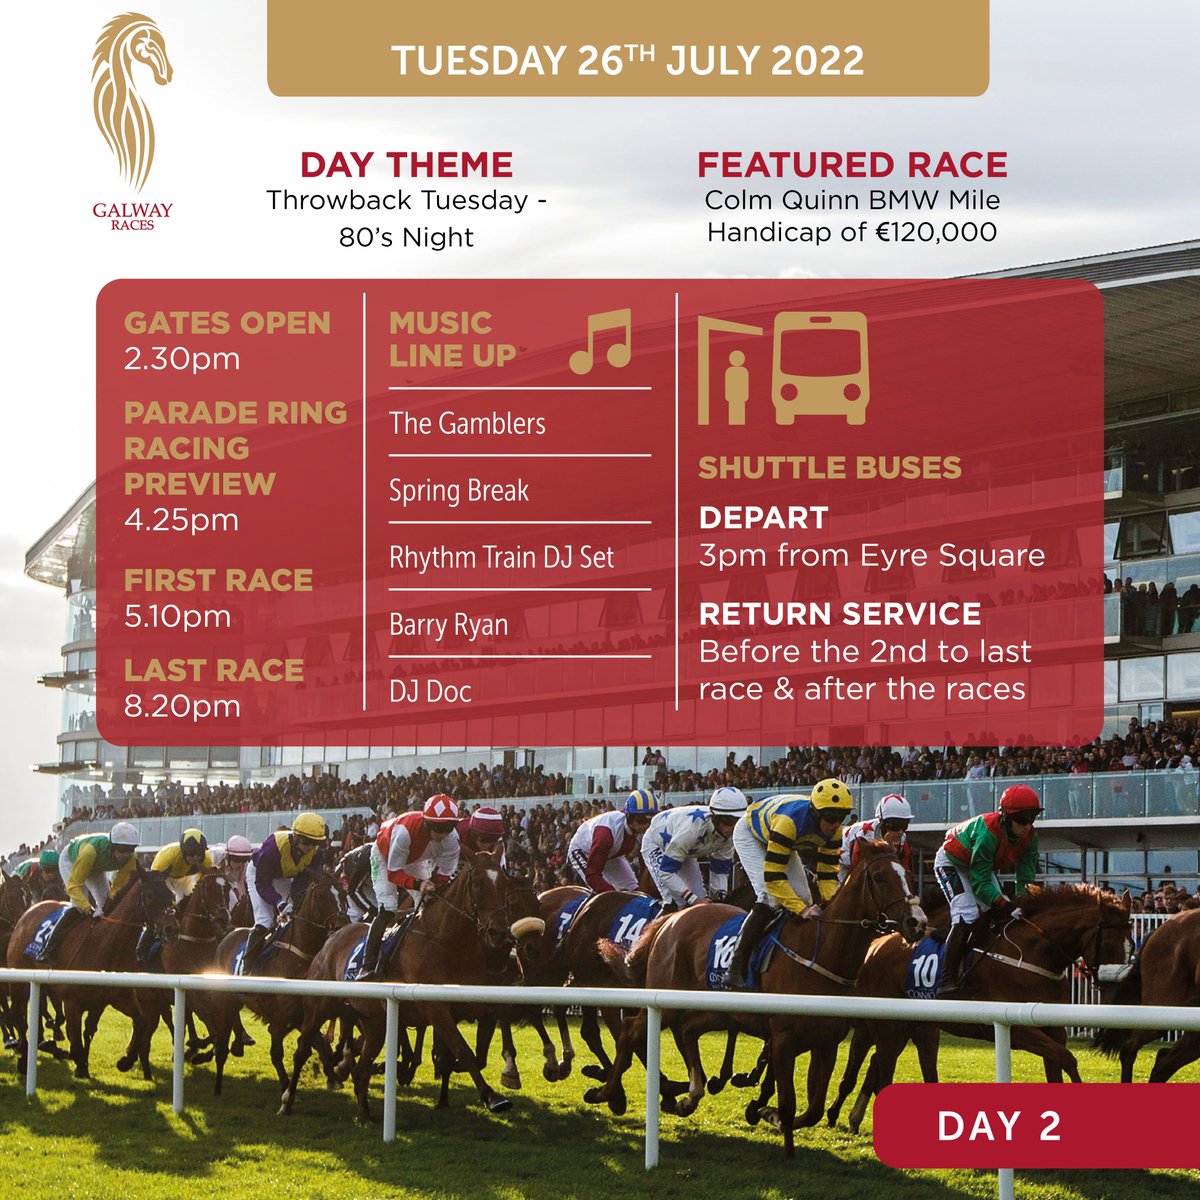 📌COMING UP TODAY, TUESDAY⤵️ 👉 The @ColmQuinn_bmw Mile Handicap of €120,000 👉 We are joined by the All-Ireland Minor Football Champions (Galway), & 👉 The superb 80's band, SpringBreak, + lots more! #GalwayRaces #GiddyforGalway